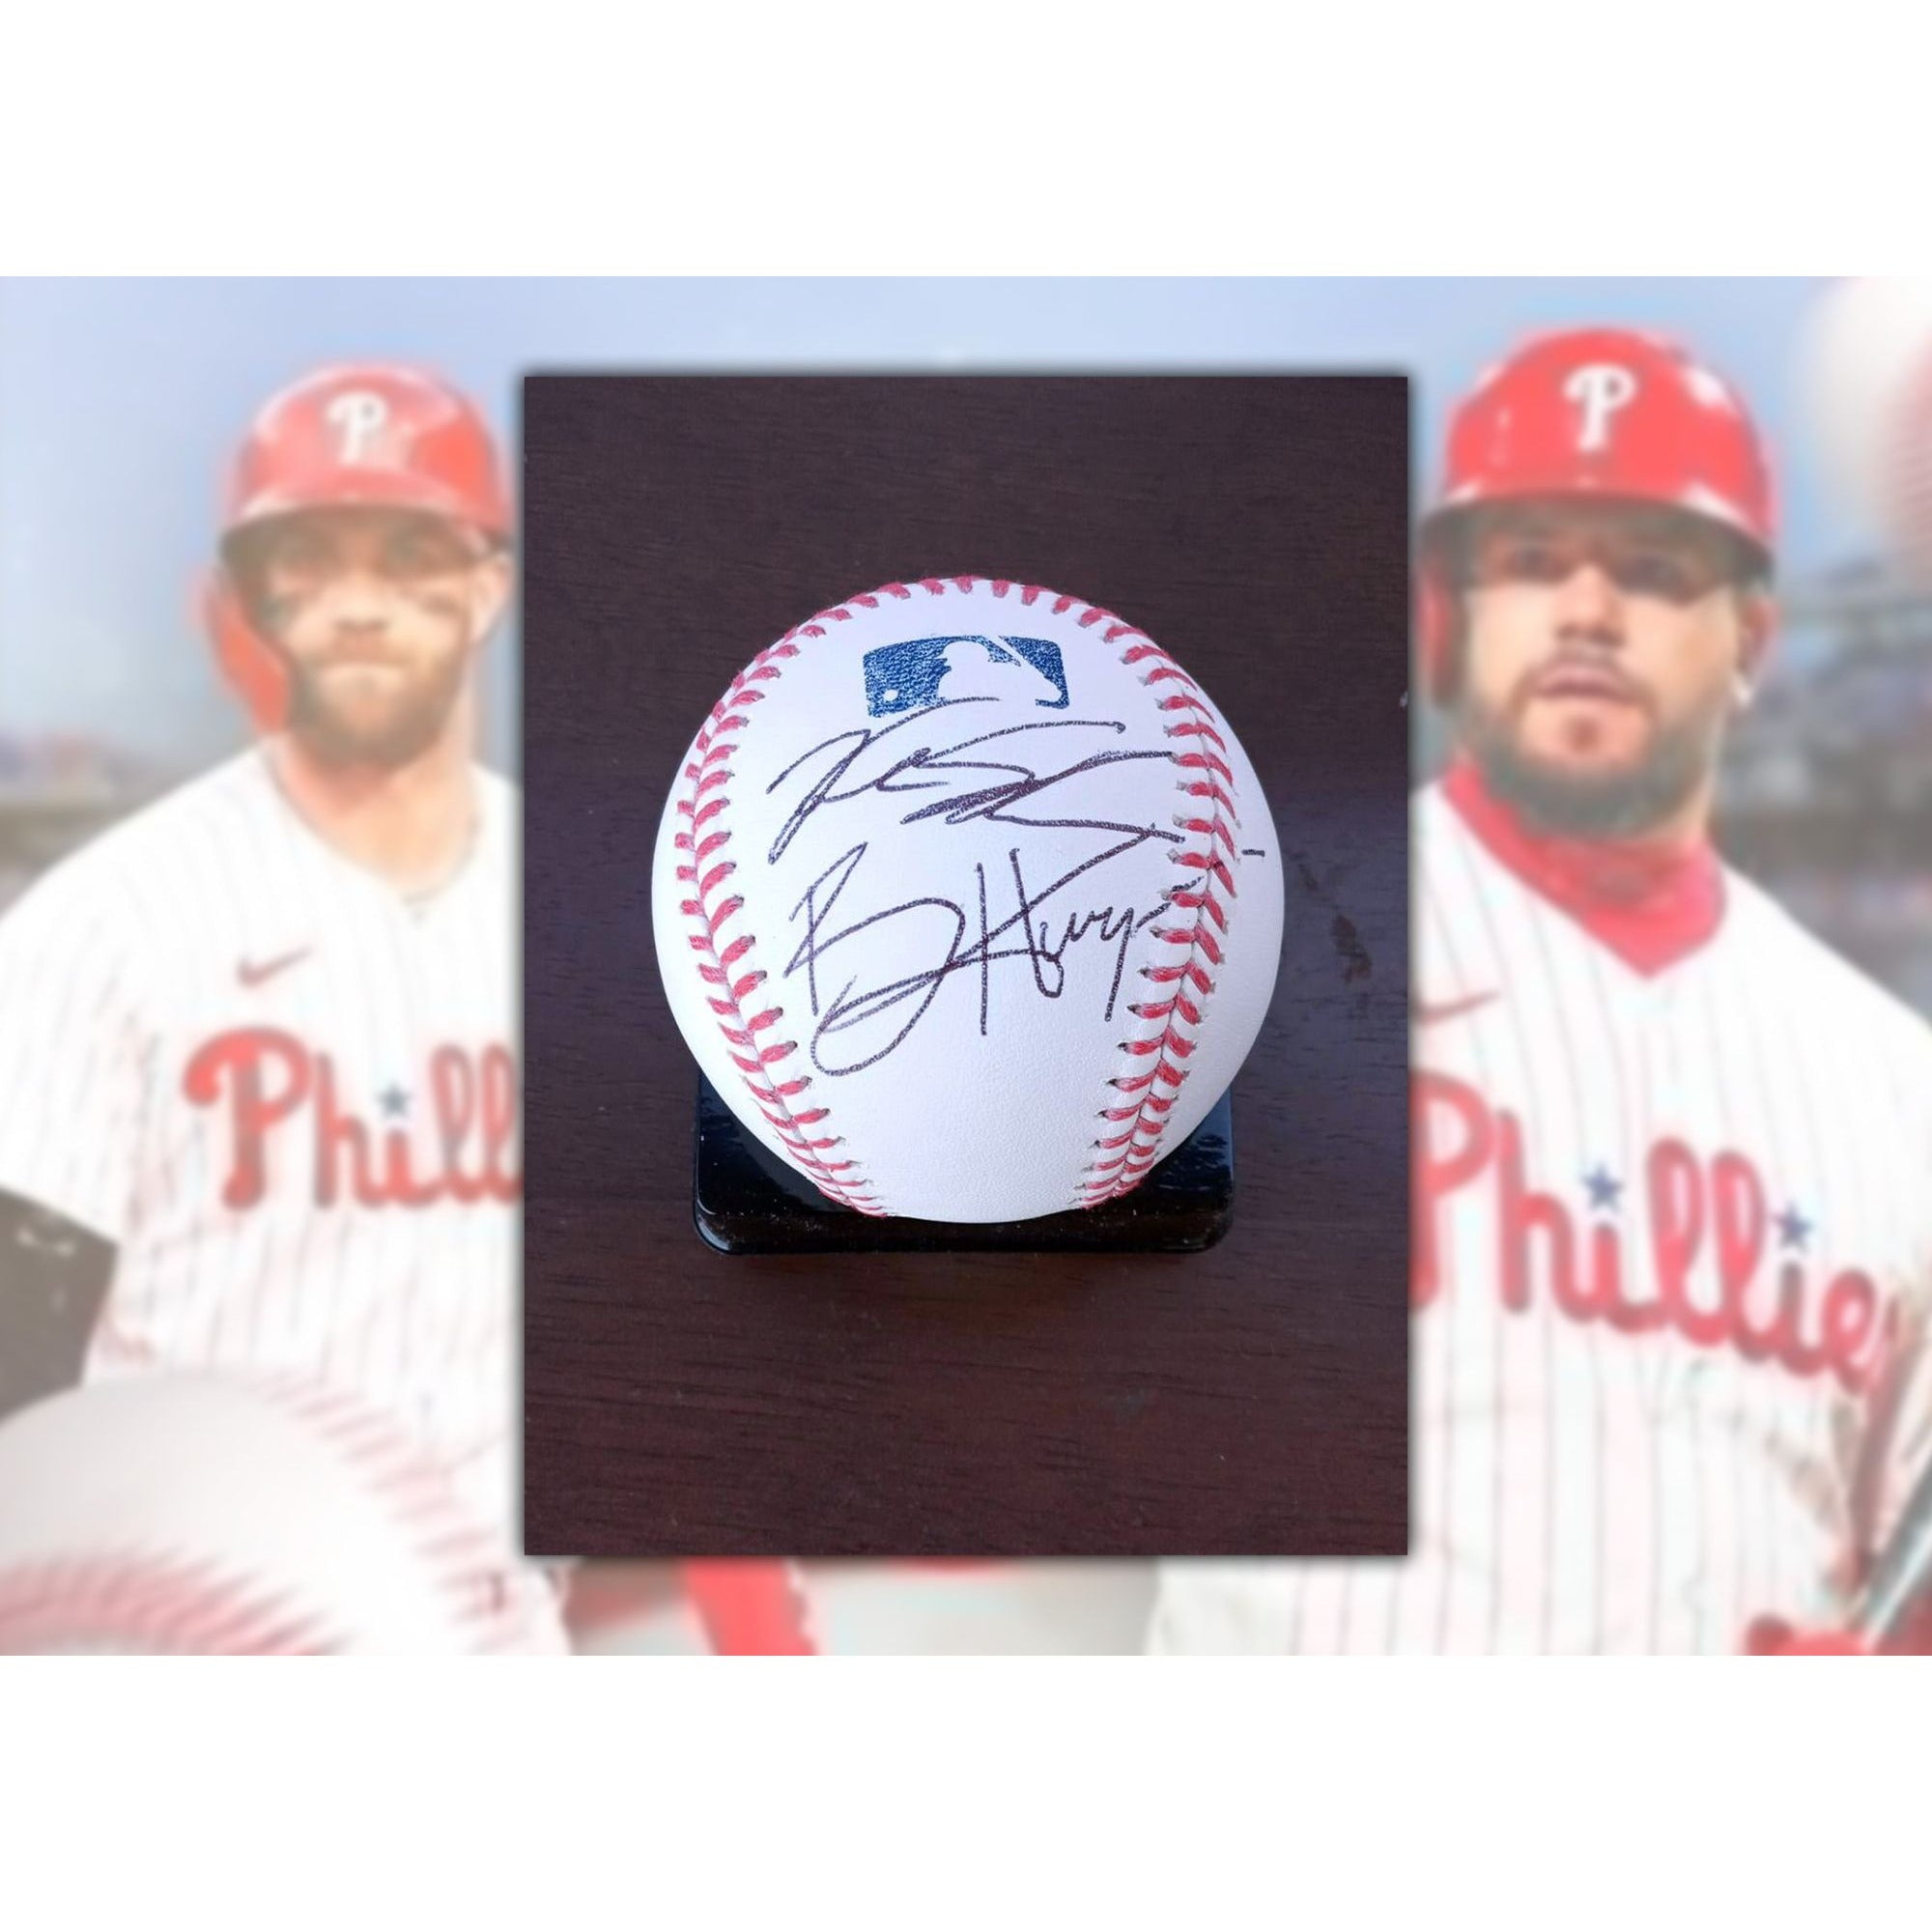 Bryce Harper and Kyle Schwarber Rawlings MLB baseball signed with